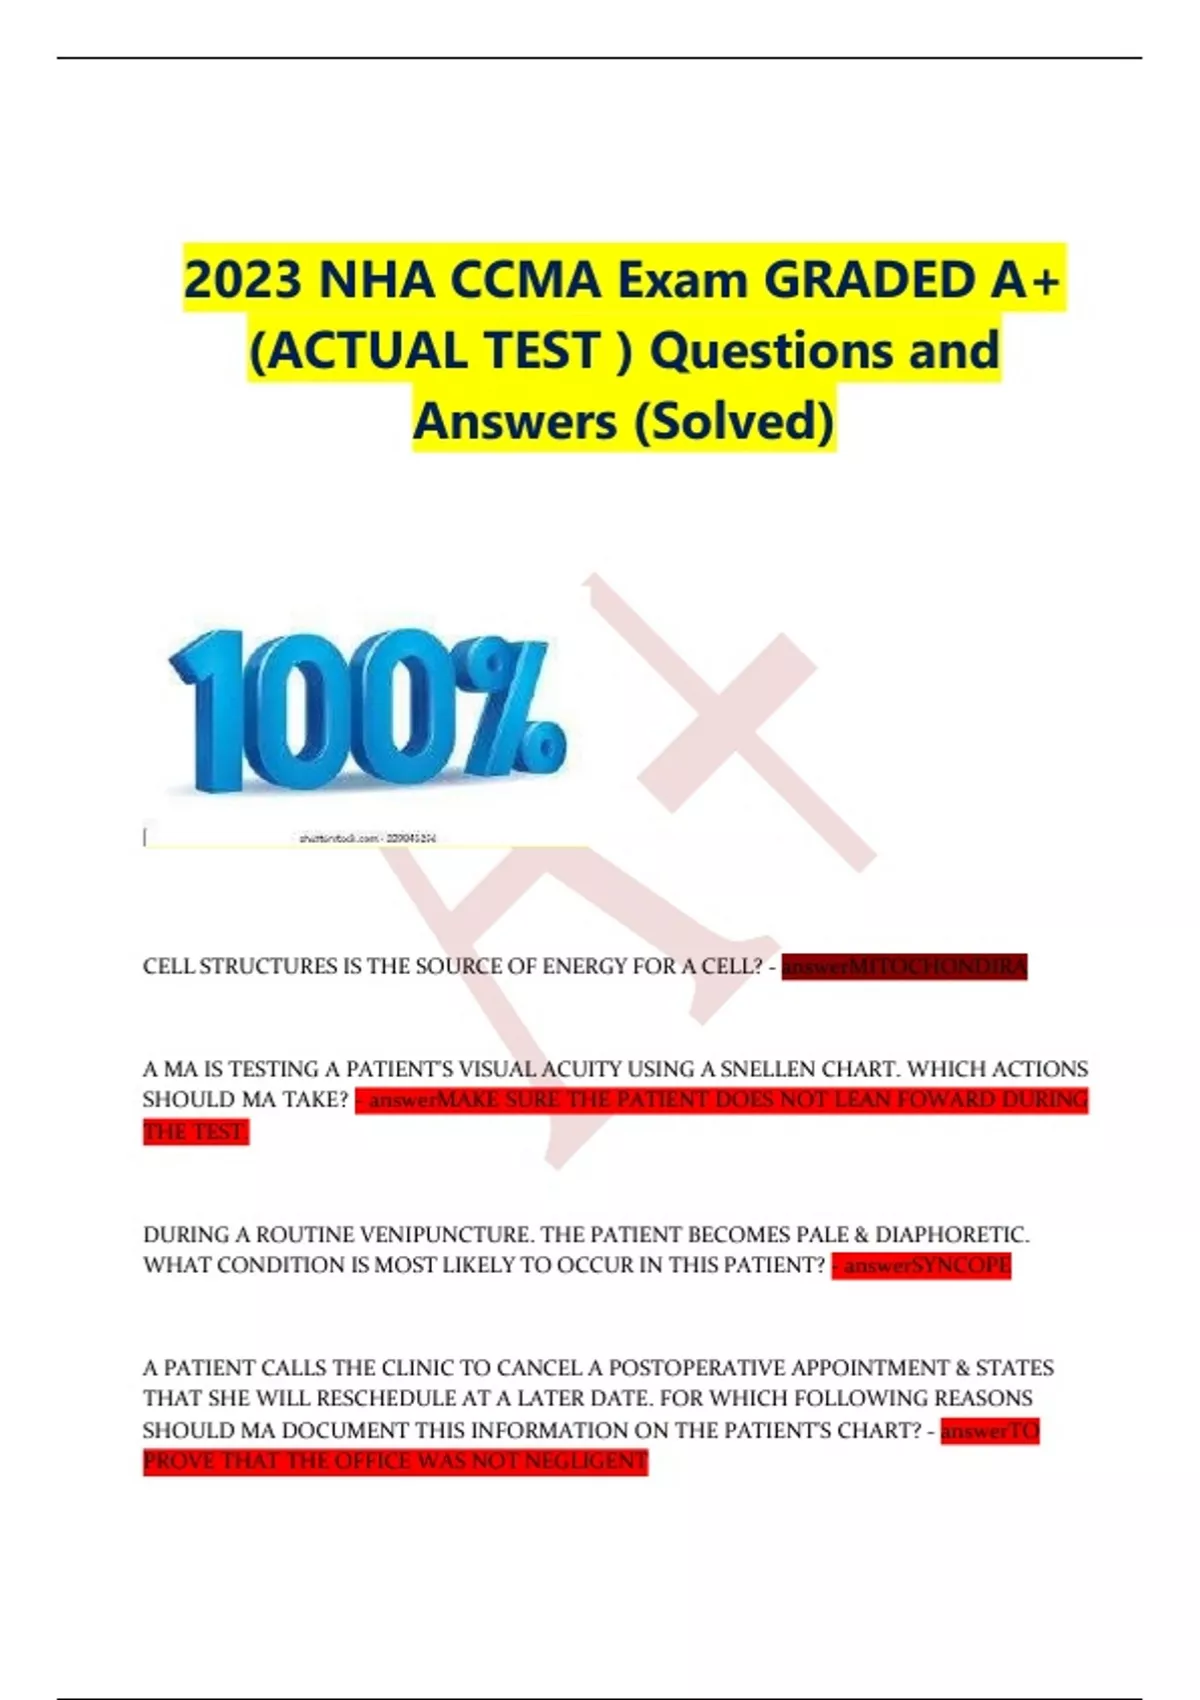 2023 NHA CCMA Exam GRADED A+ (ACTUAL TEST ) Questions and Answers